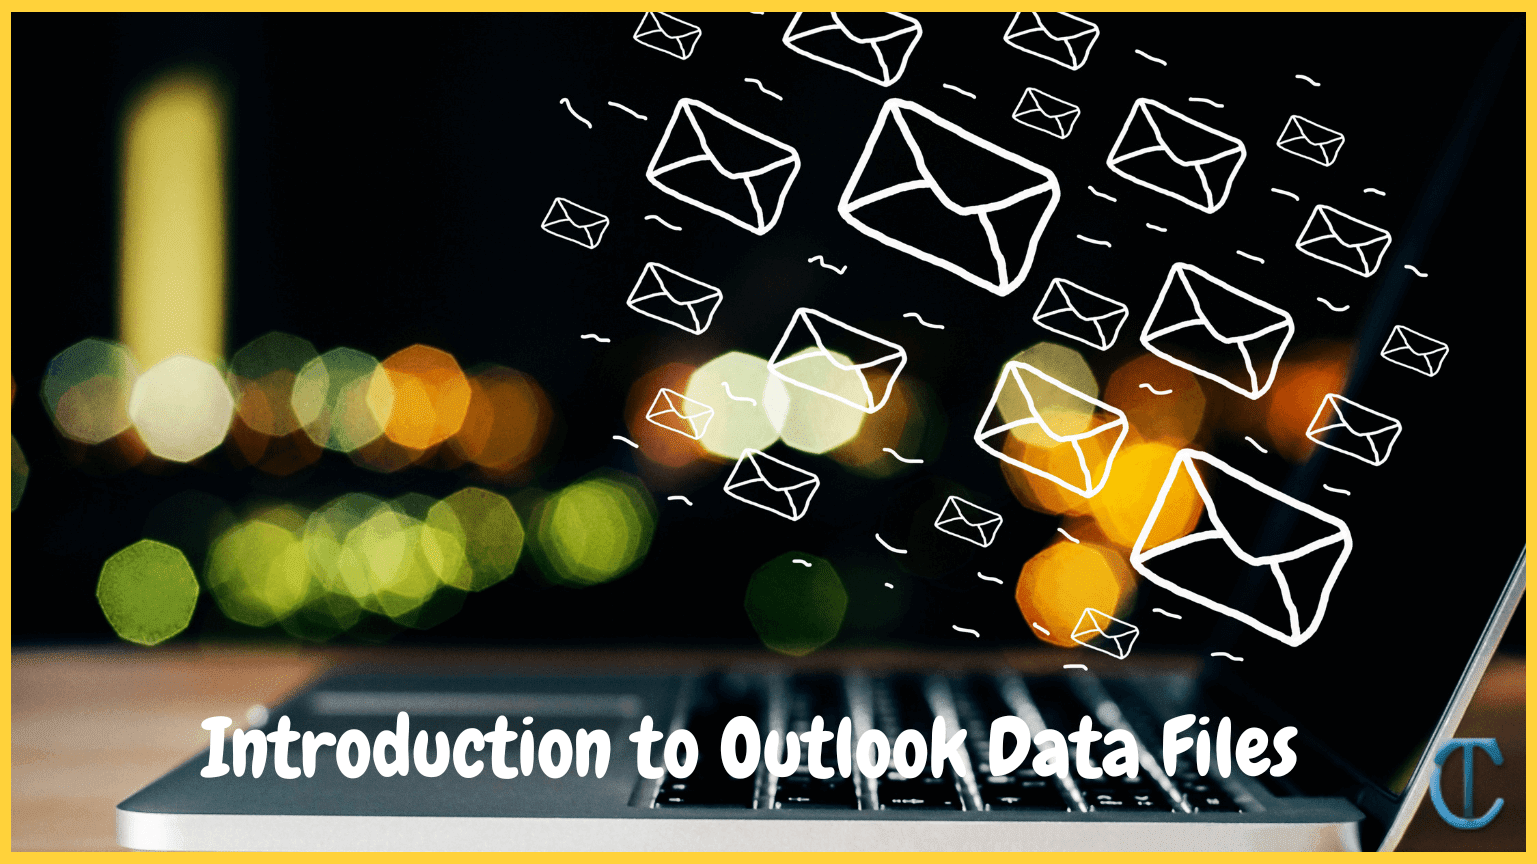 Introduction to Outlook Data Files